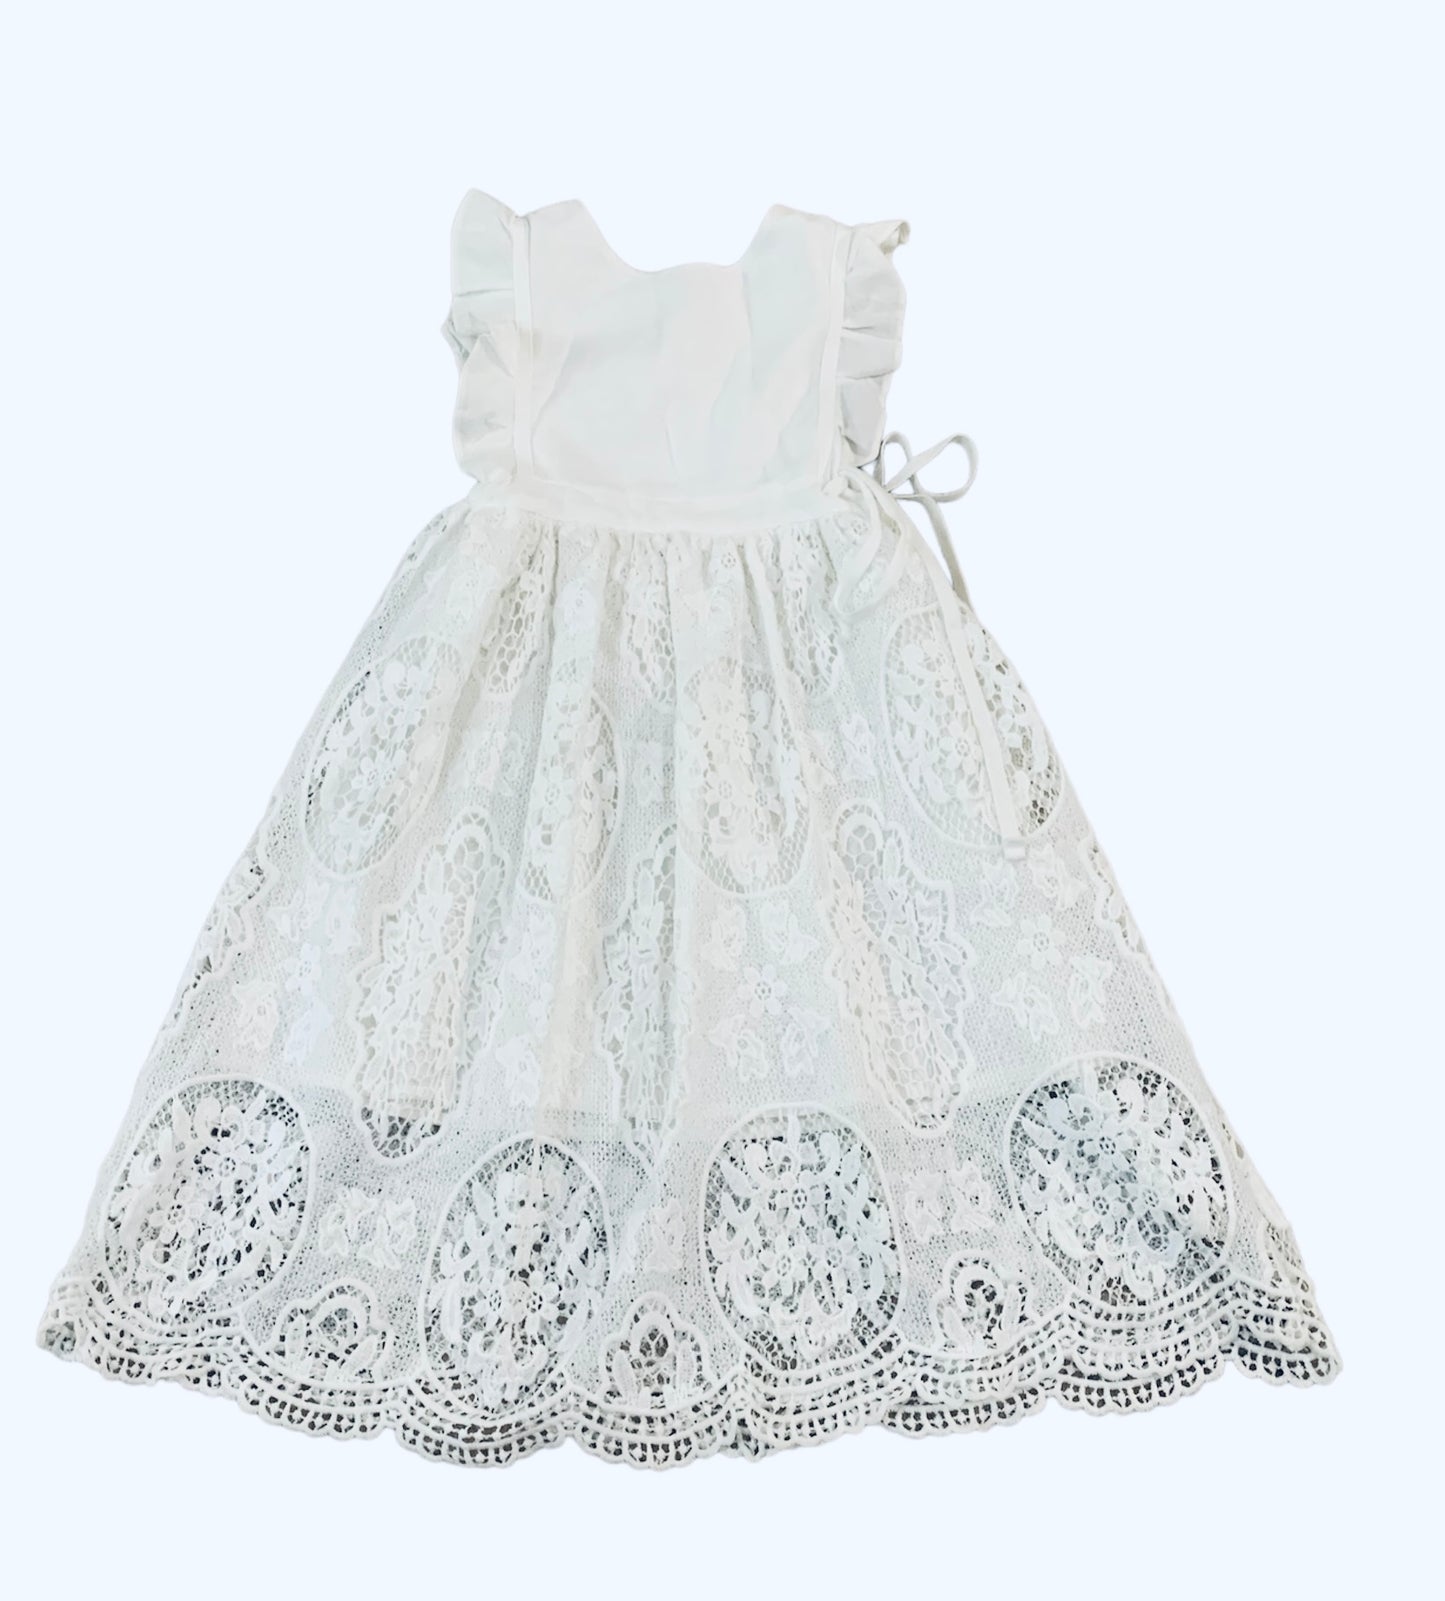 Girls Bow Dream Lace Dress Size 5